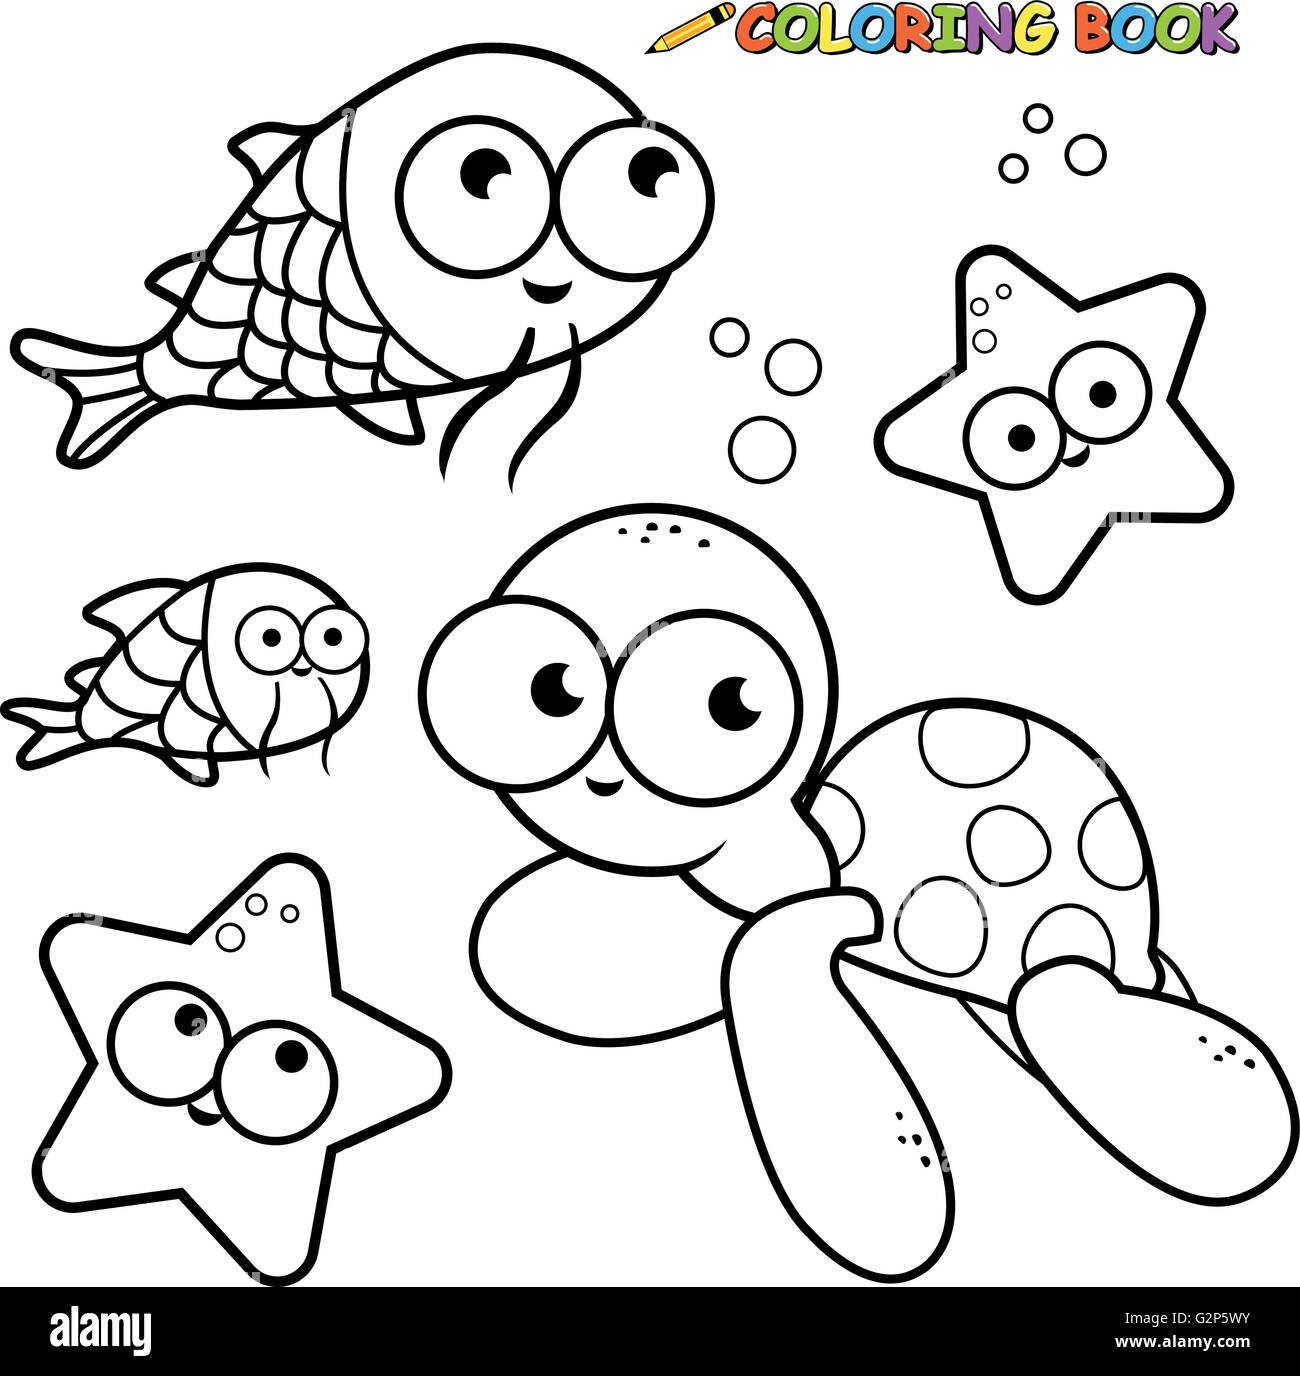 Black And White Outline Image Sea Animals Coloring Book Page Farm Animal Coloring Pages Black And White Outline Image Sea Animals Coloring Book Page